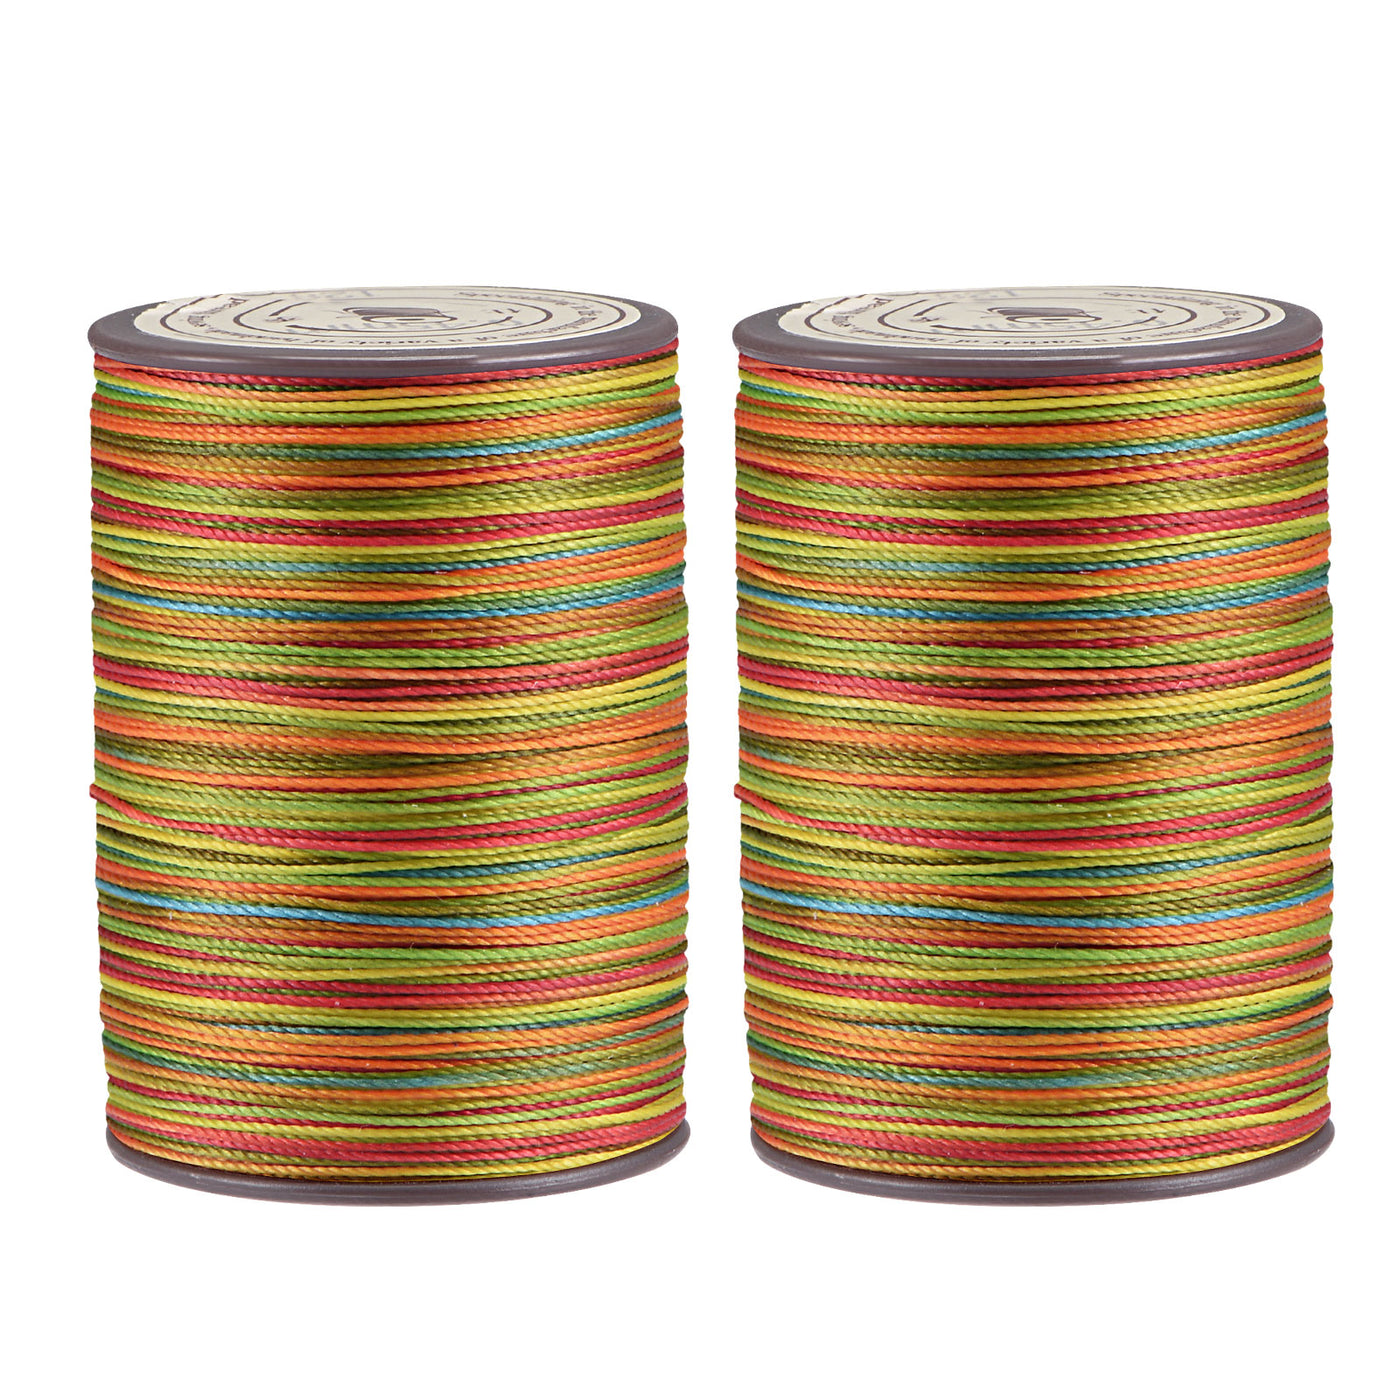 Uxcell Uxcell 2pcs Thin Waxed Thread 93 Yards 0.65mm Dia Polyester Wax-Coated Cord Colorful